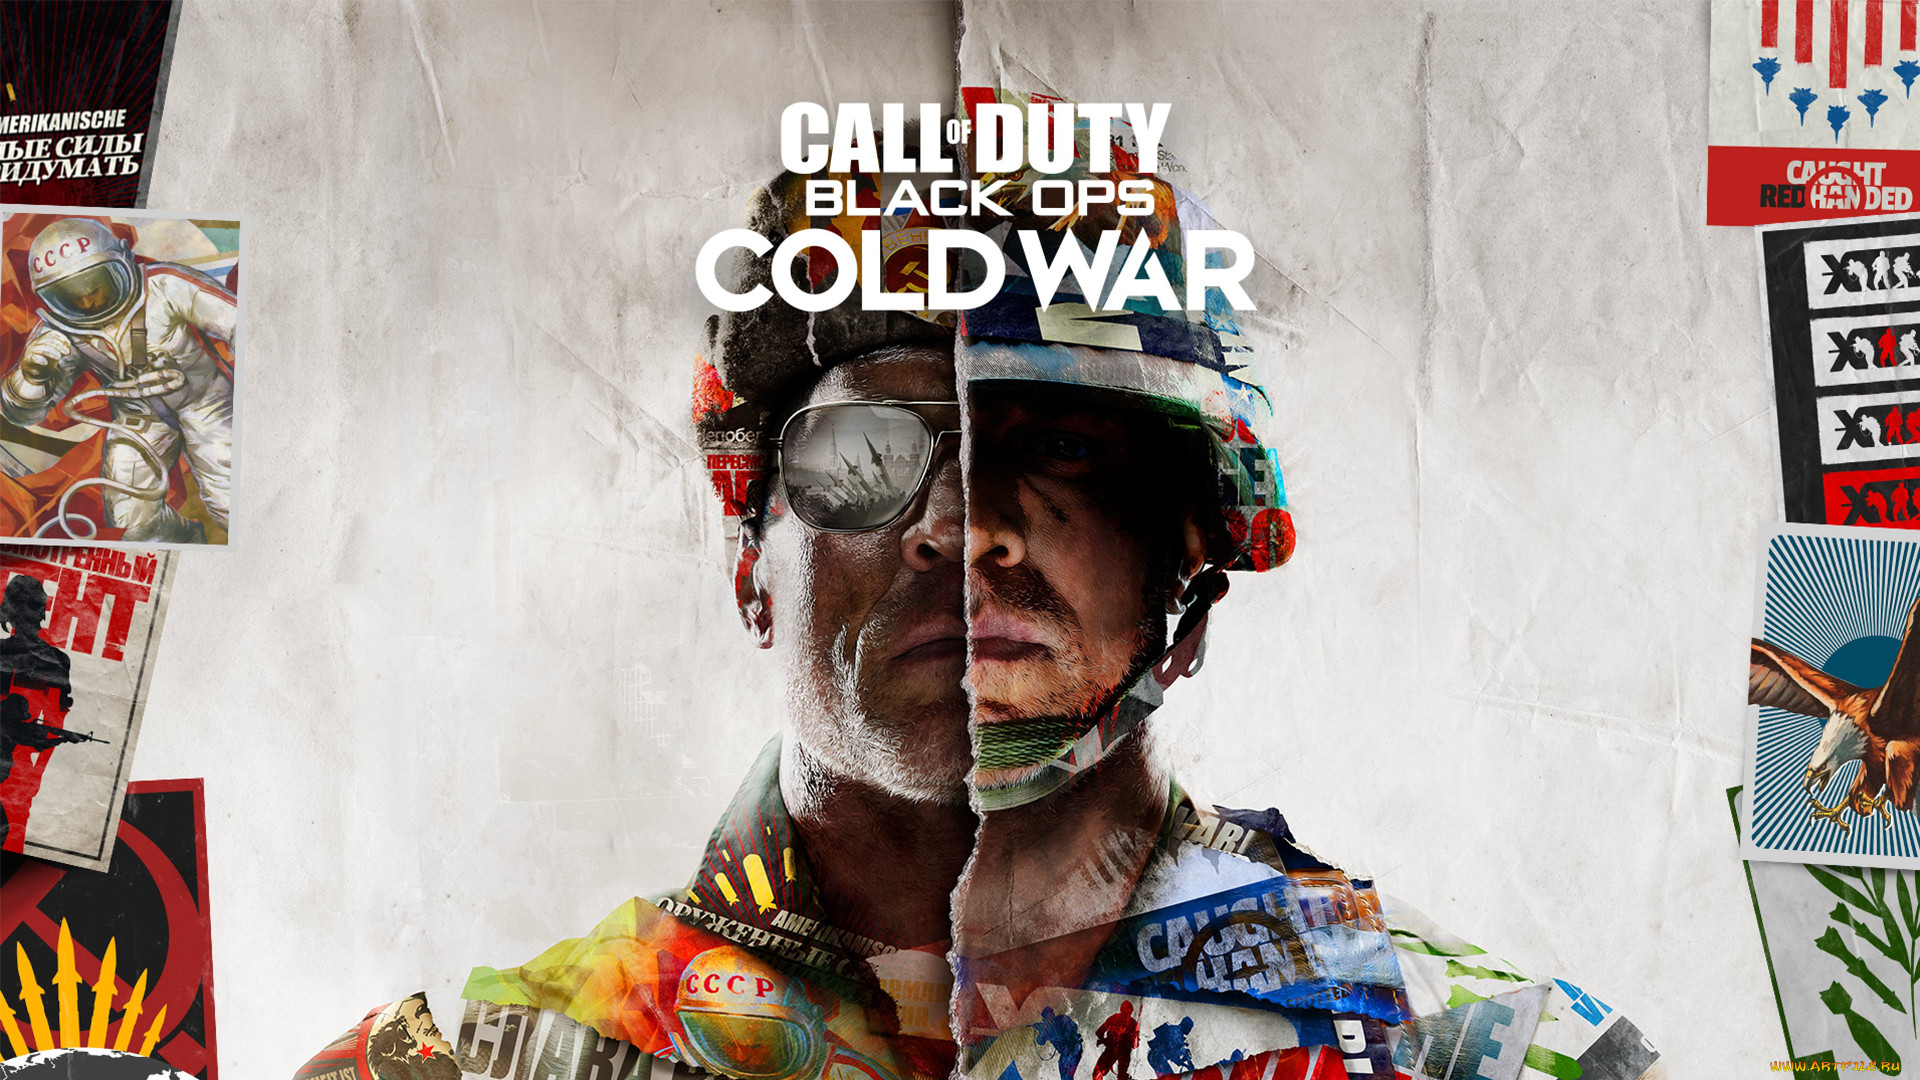 call of duty,  black ops cold war , 2020,  ,  black ops, call, of, duty, black, ops, cold, war, , , , , , treyarch, raven, software, activision